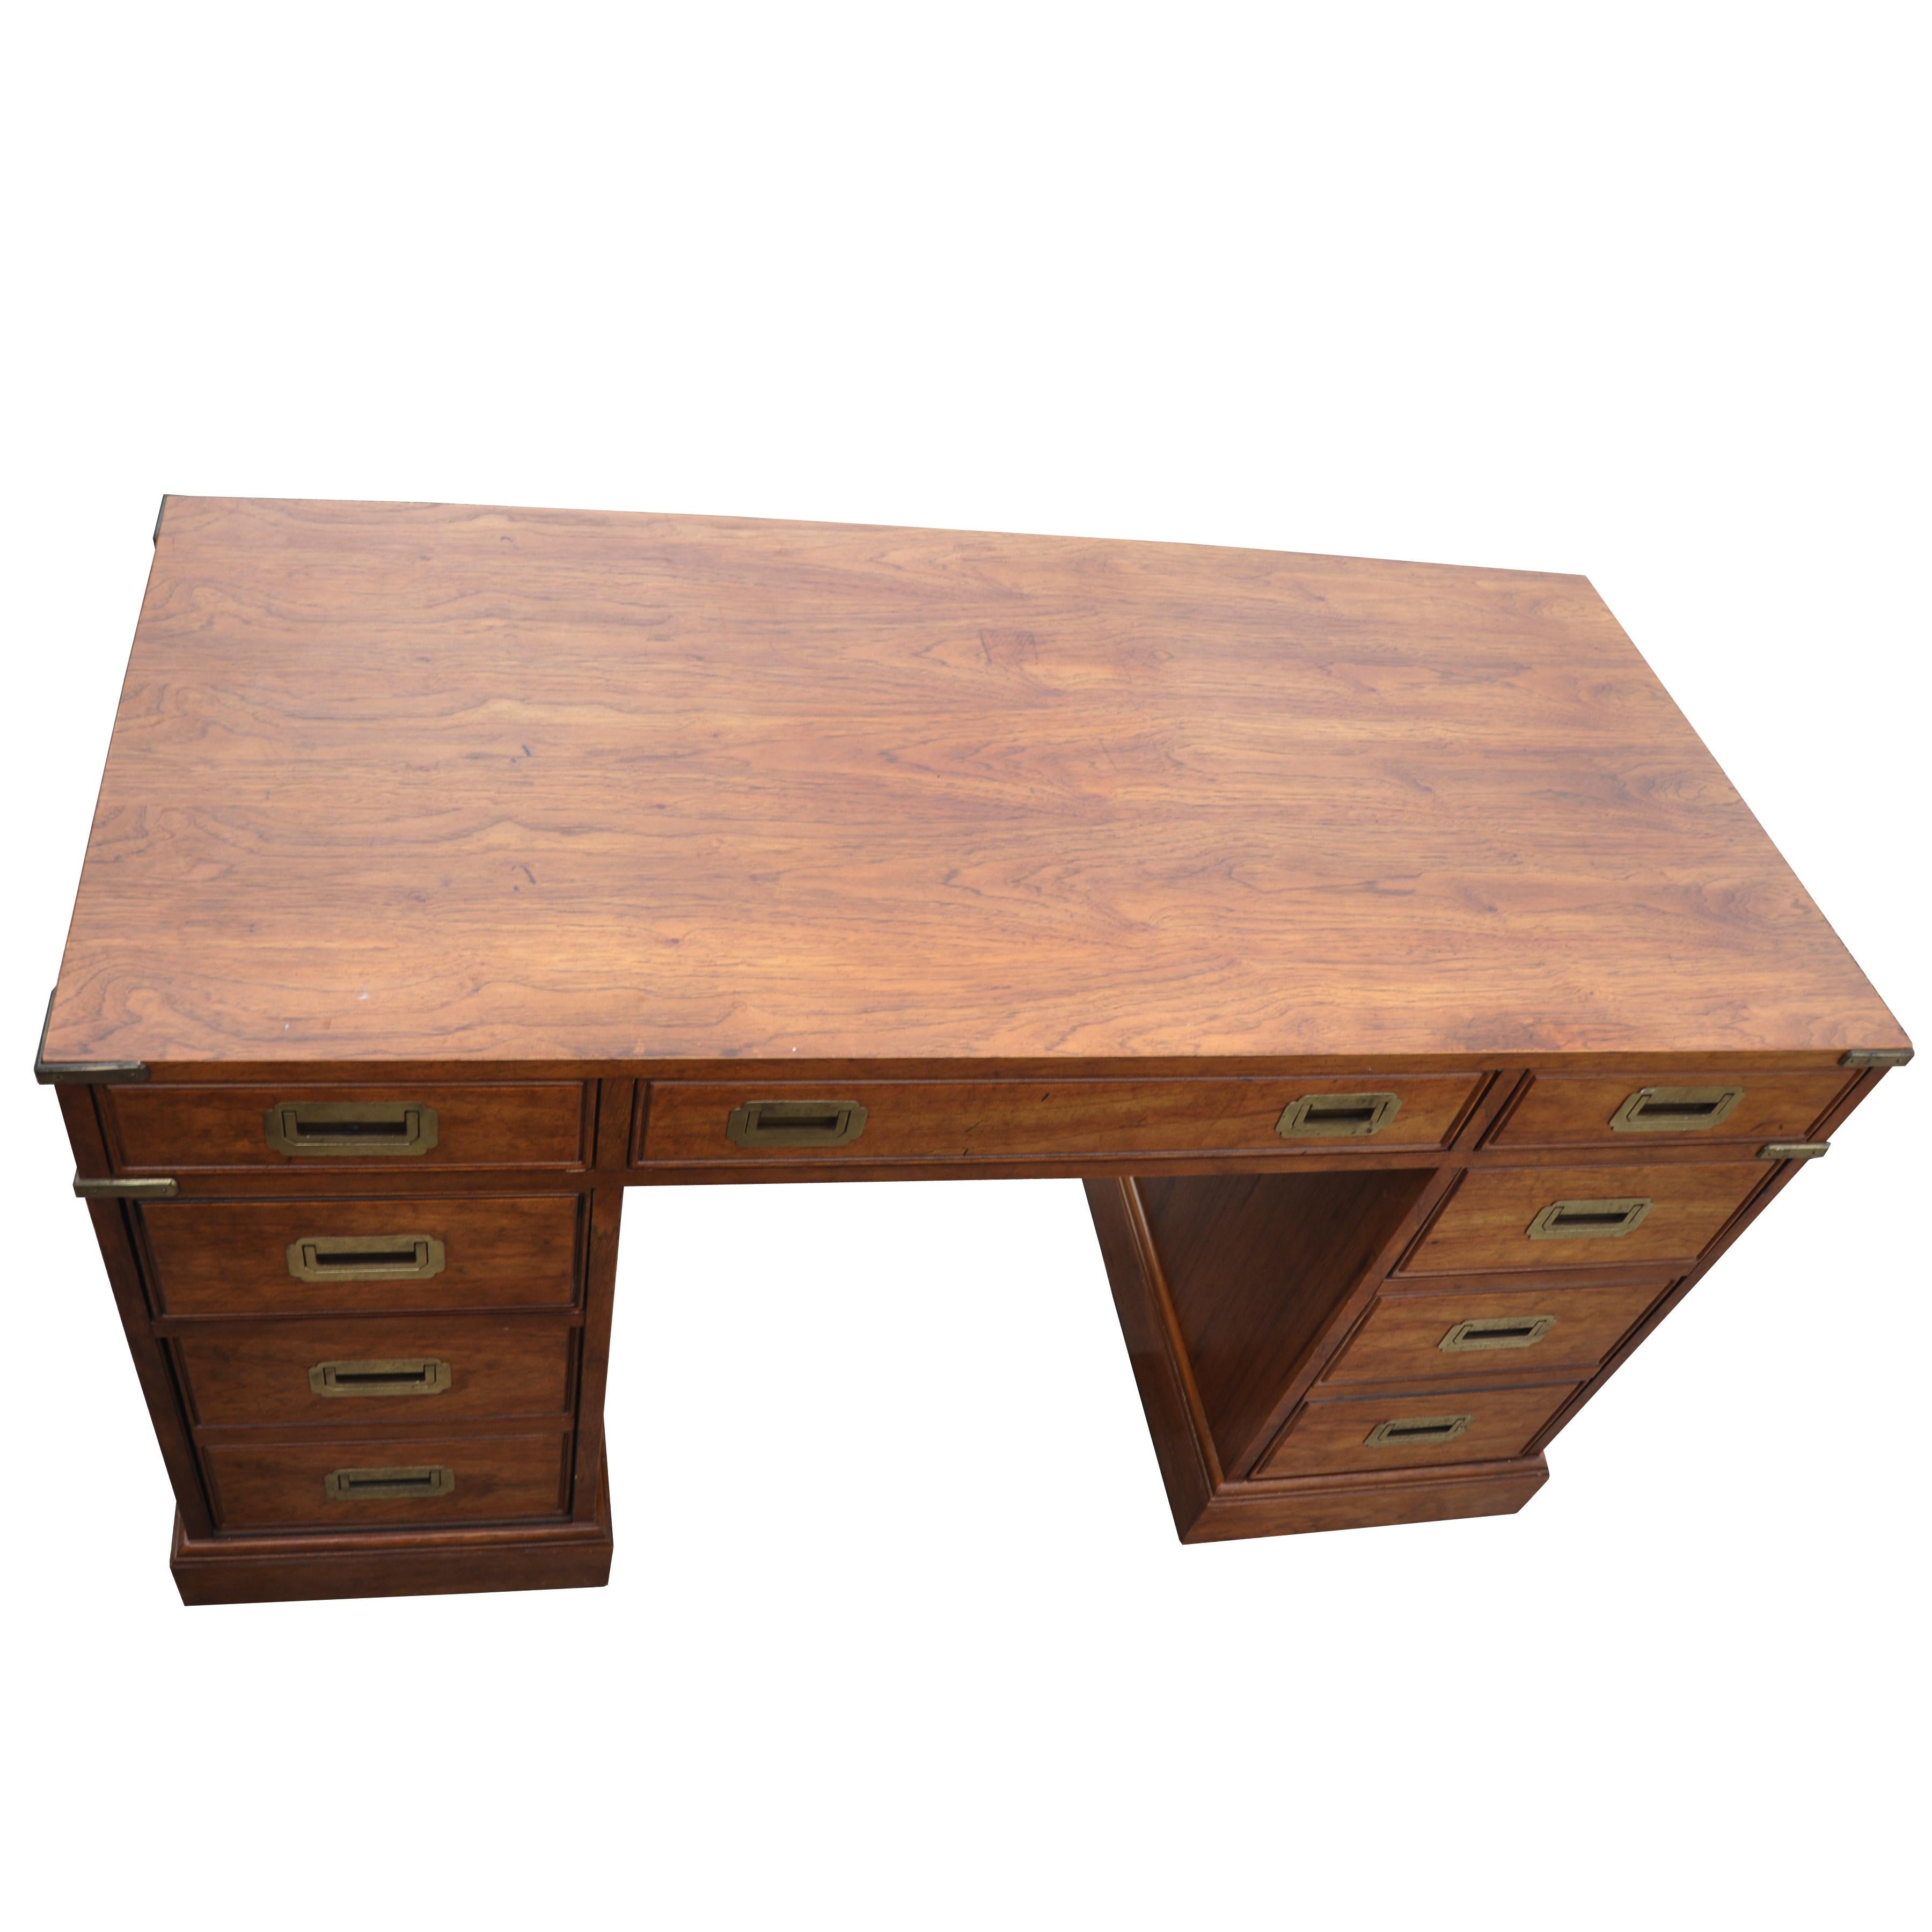 Campaign Style Desk by National Mt. Airy 1